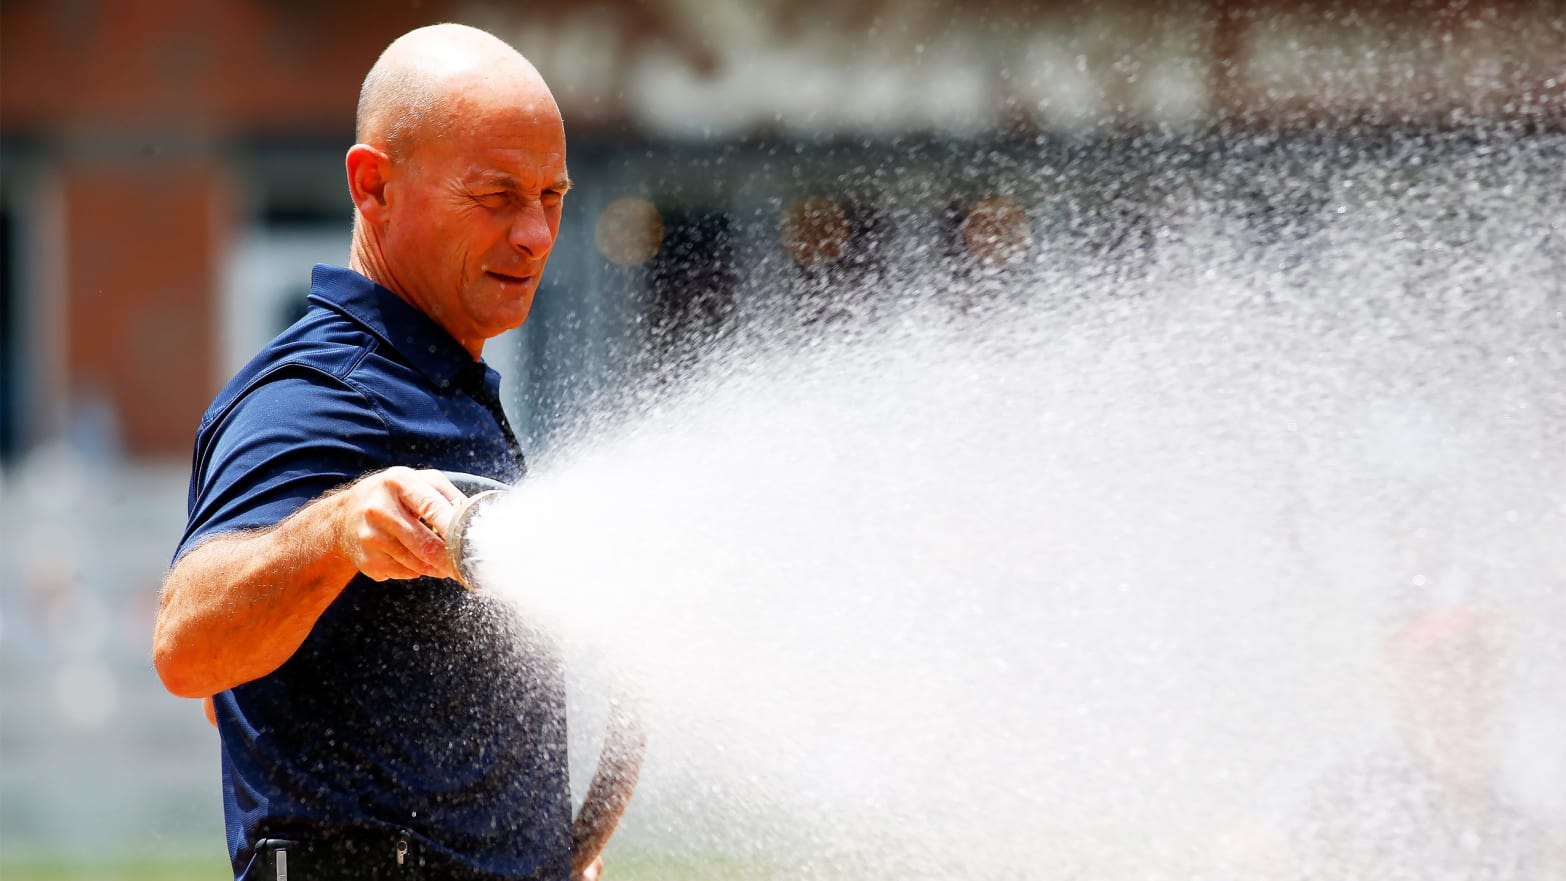 Chilling: Braves' refrigerated cup holders help battle heat